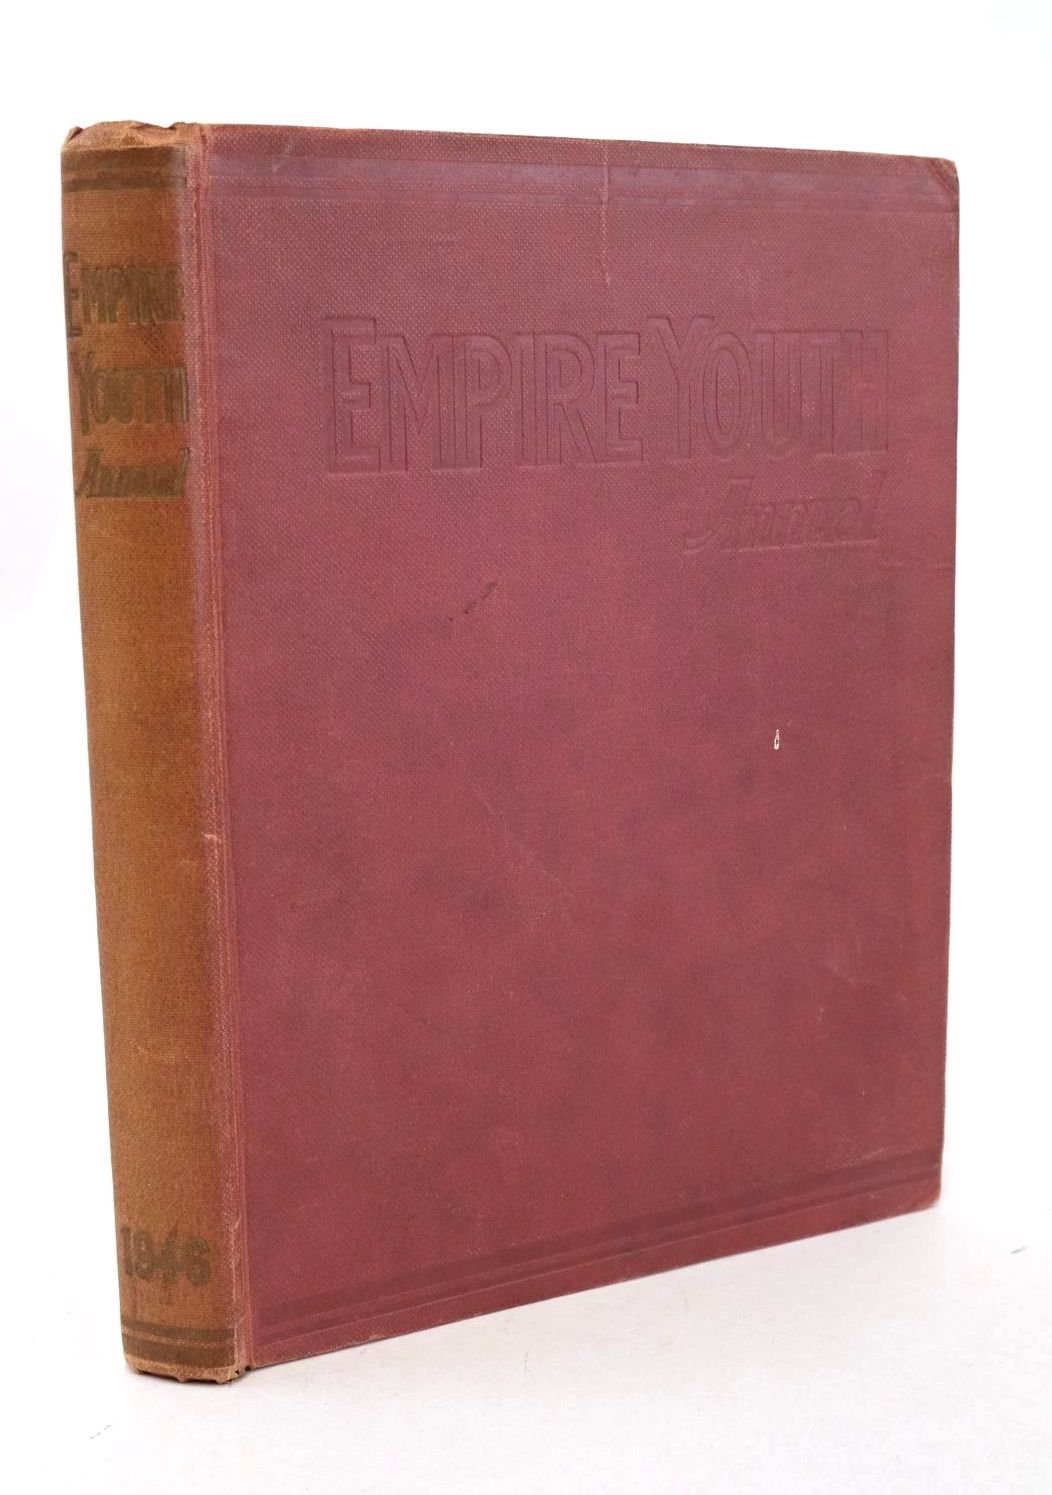 Photo of EMPIRE YOUTH ANNUAL 1946 published by P.R. Gawthorn Ltd. (STOCK CODE: 1327264)  for sale by Stella & Rose's Books